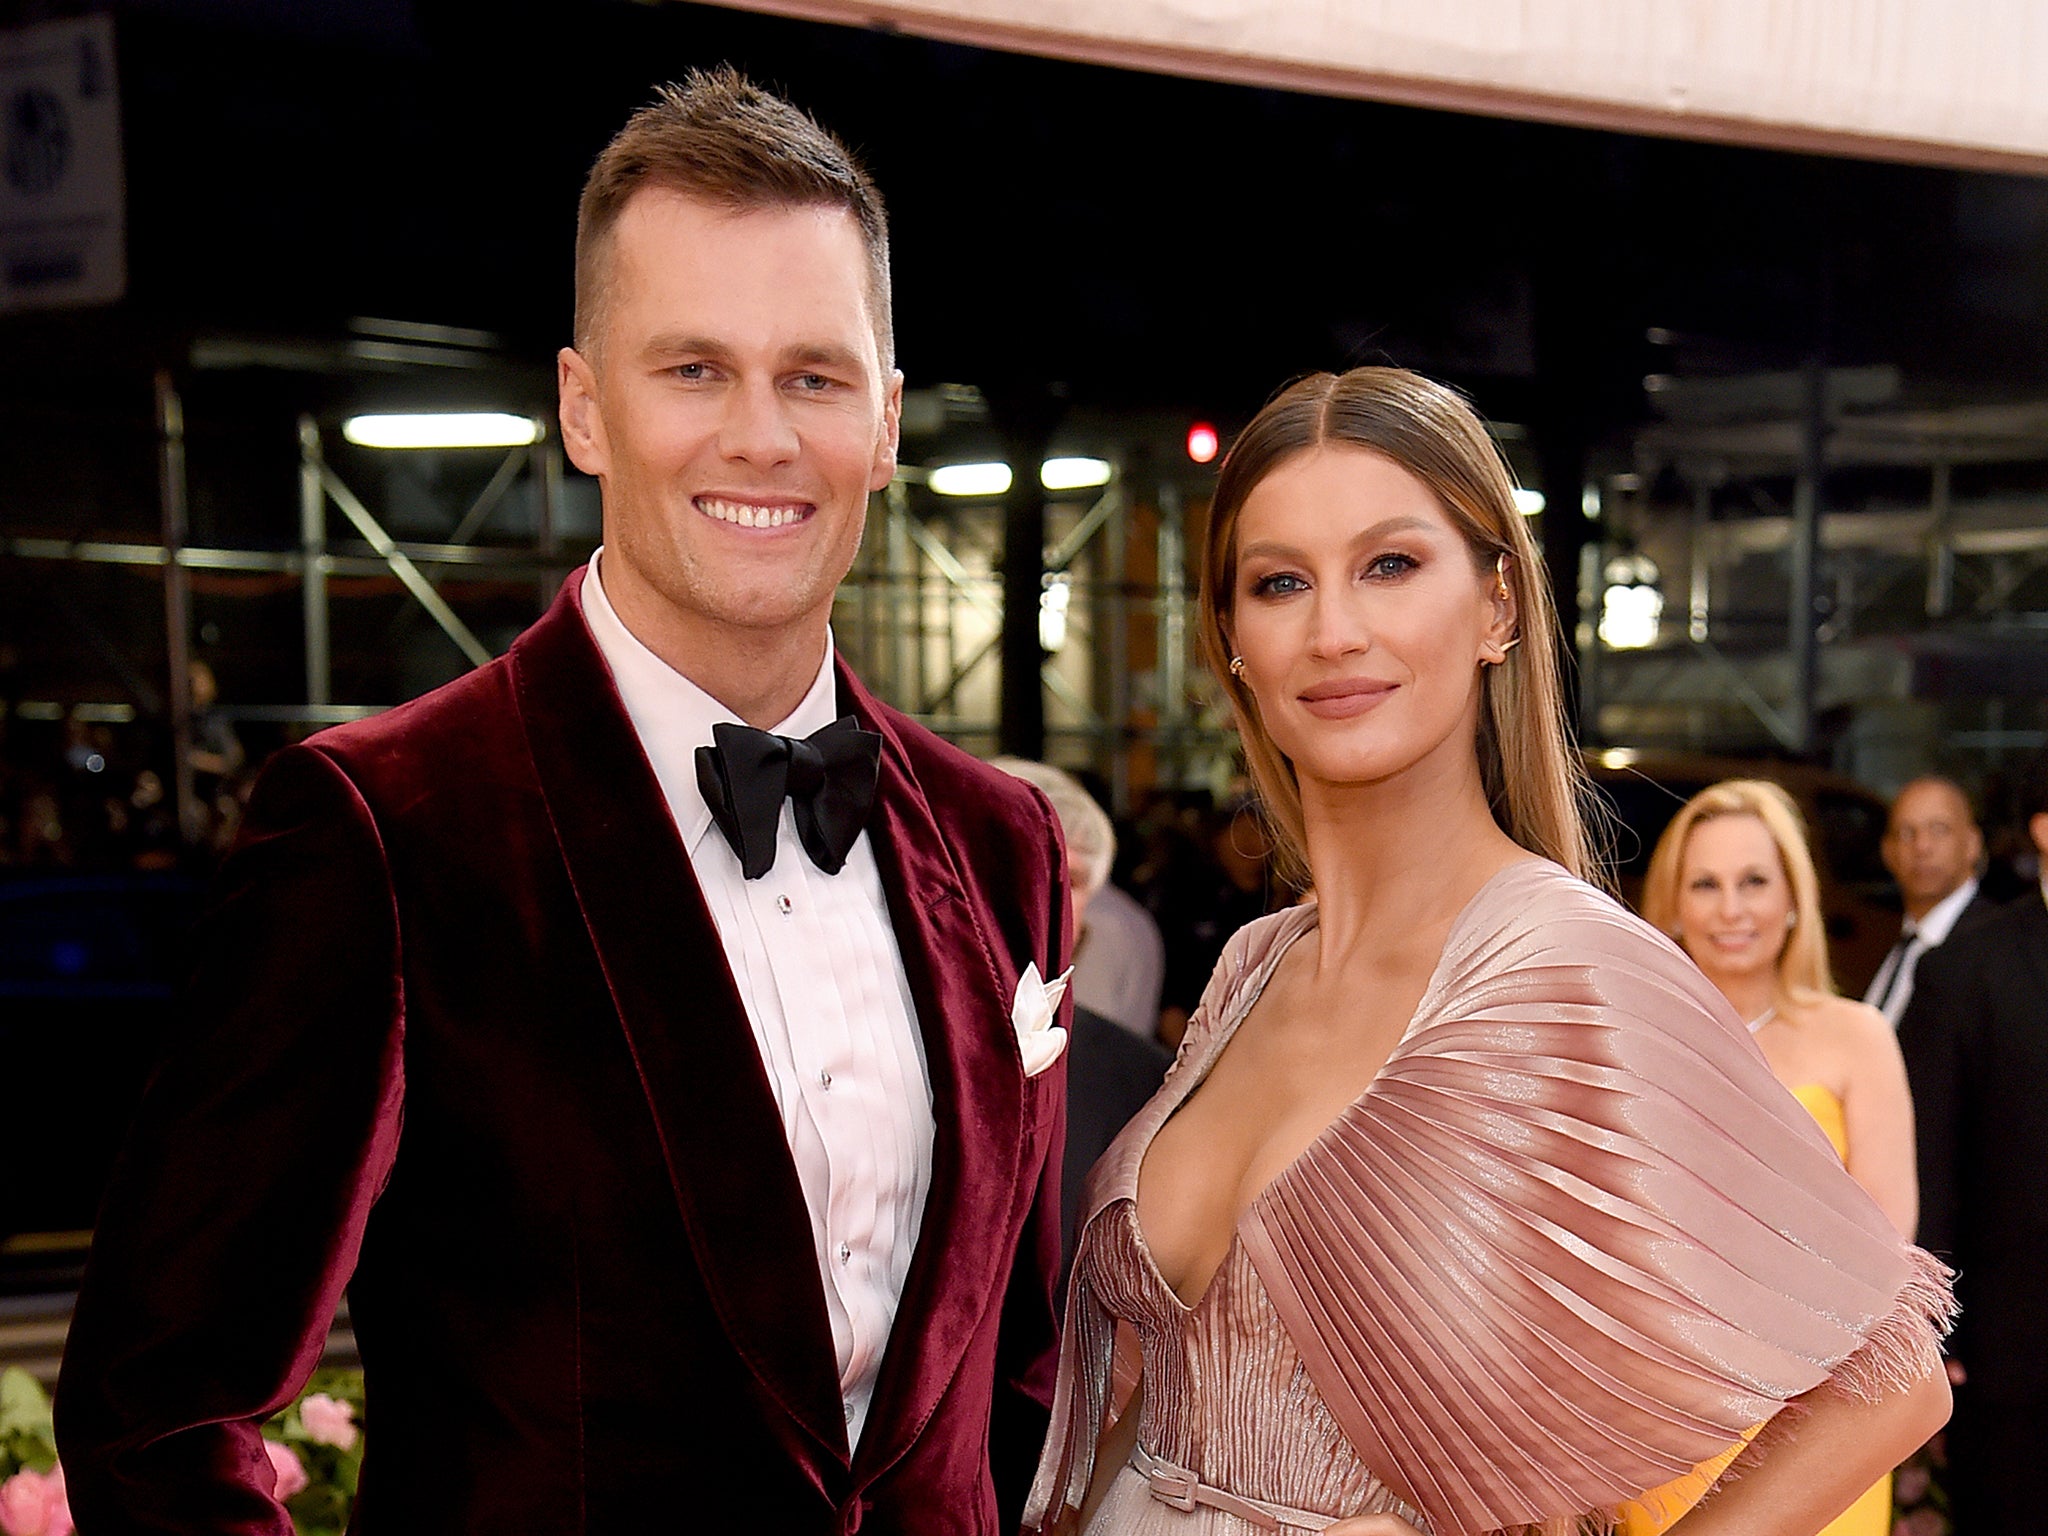 Tom Brady and Gisele Bündchen’s recent divorce was finalised speedily, reportedly due to an ‘ironclad’ prenup